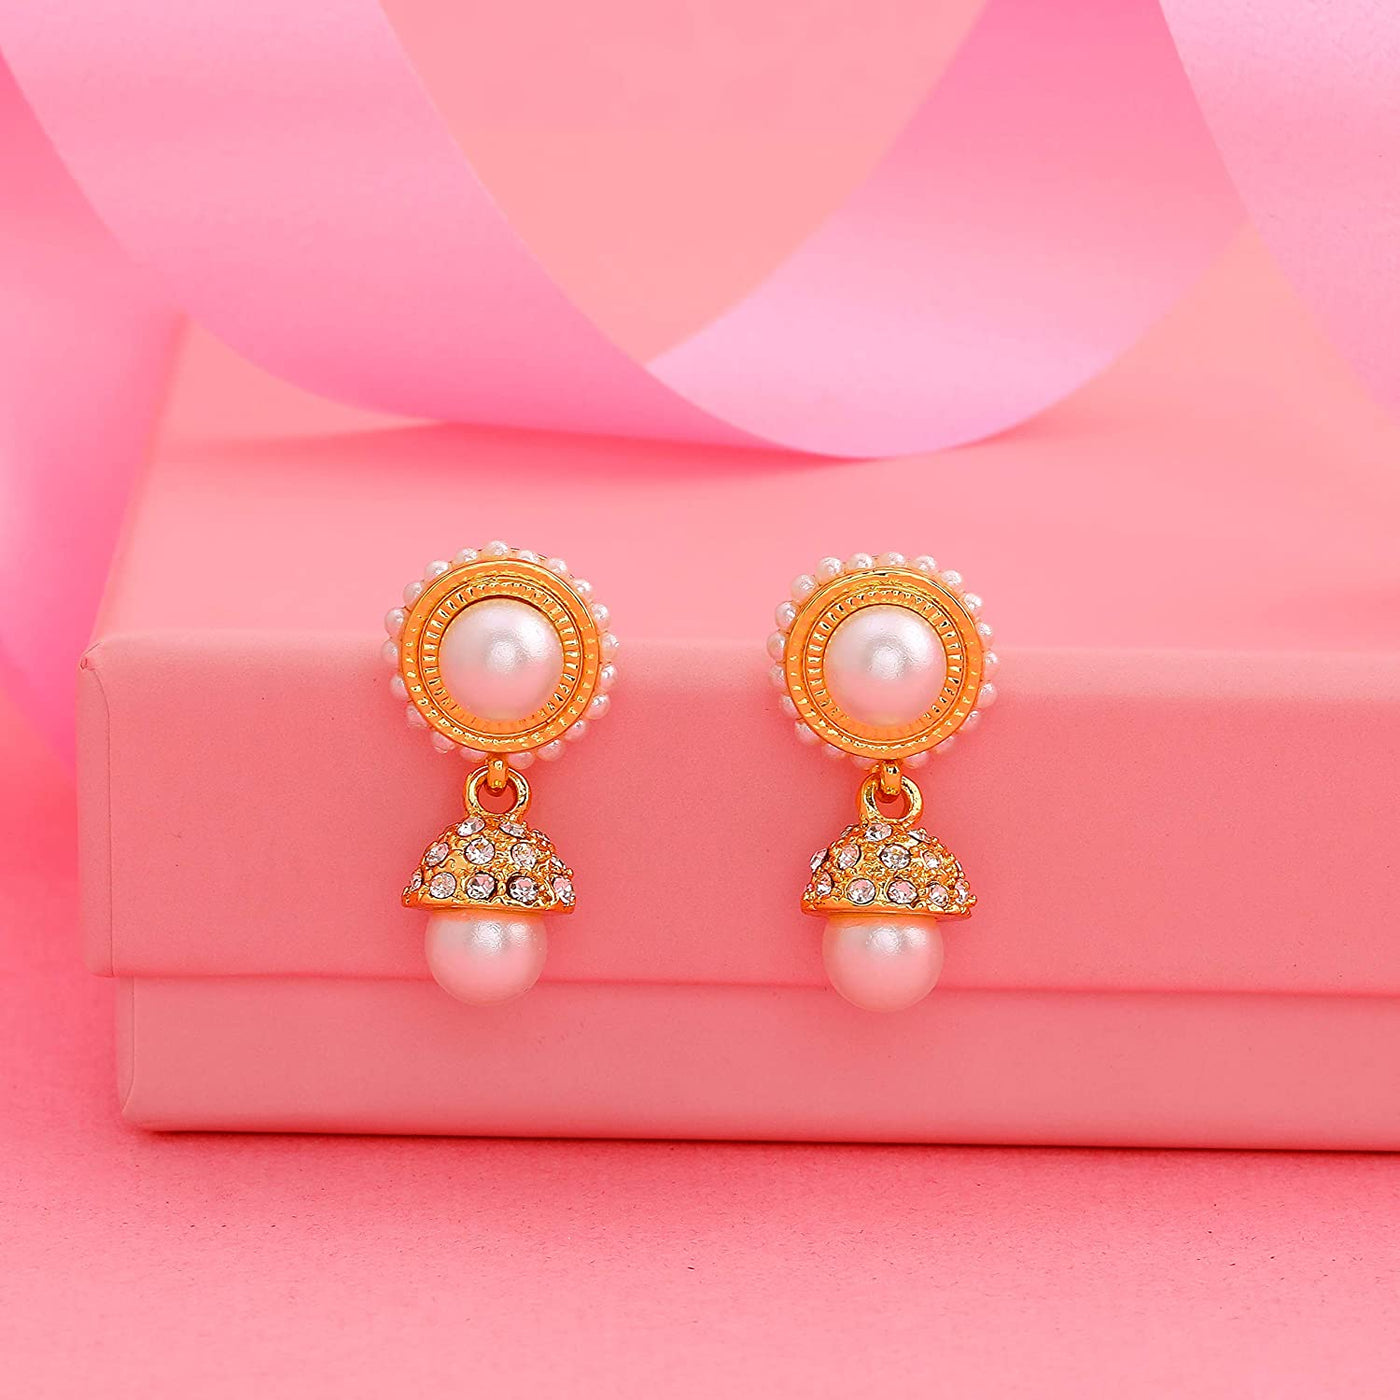 Buy Floral Design Gold Finish Party Wear Earrings Design for Girls